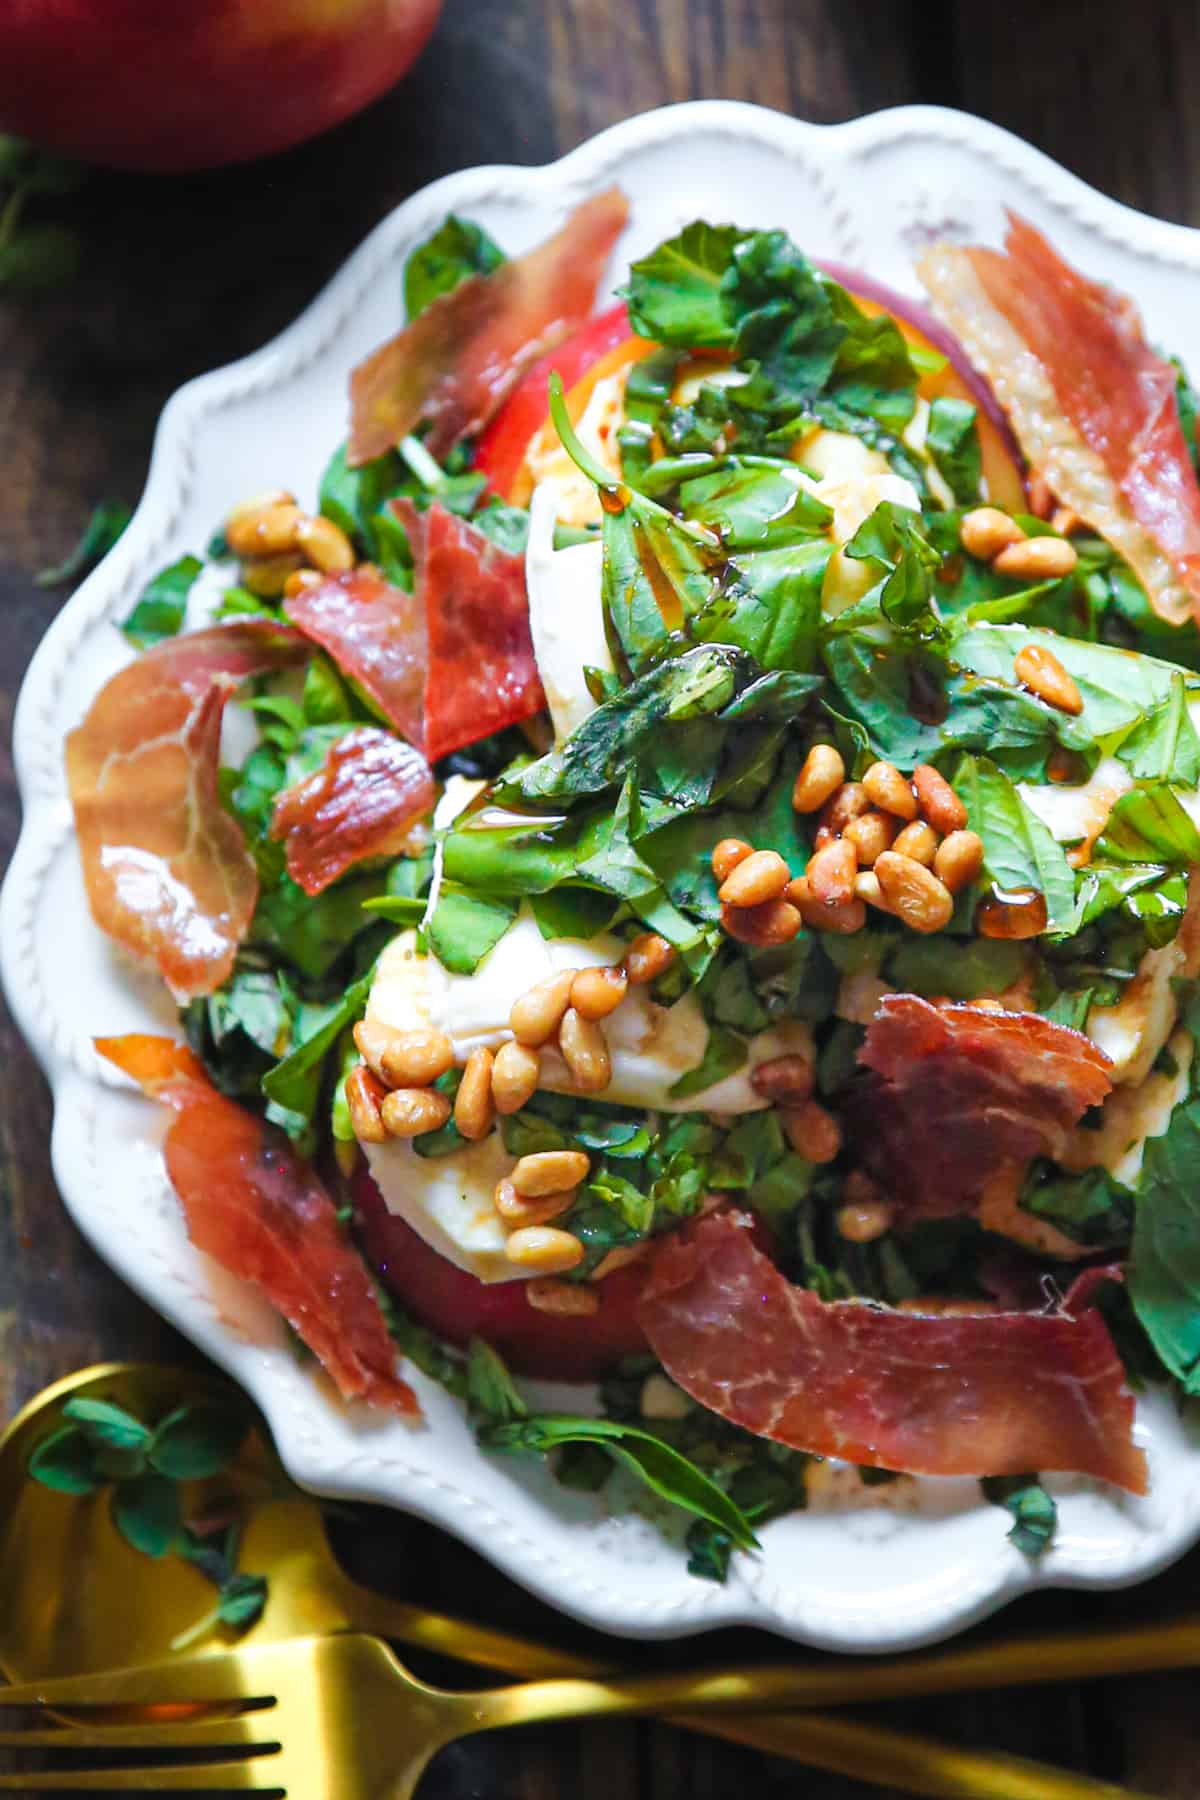 Peach Mozzarella Salad with Basil, Prosciutto, and Pine Nuts on a plate